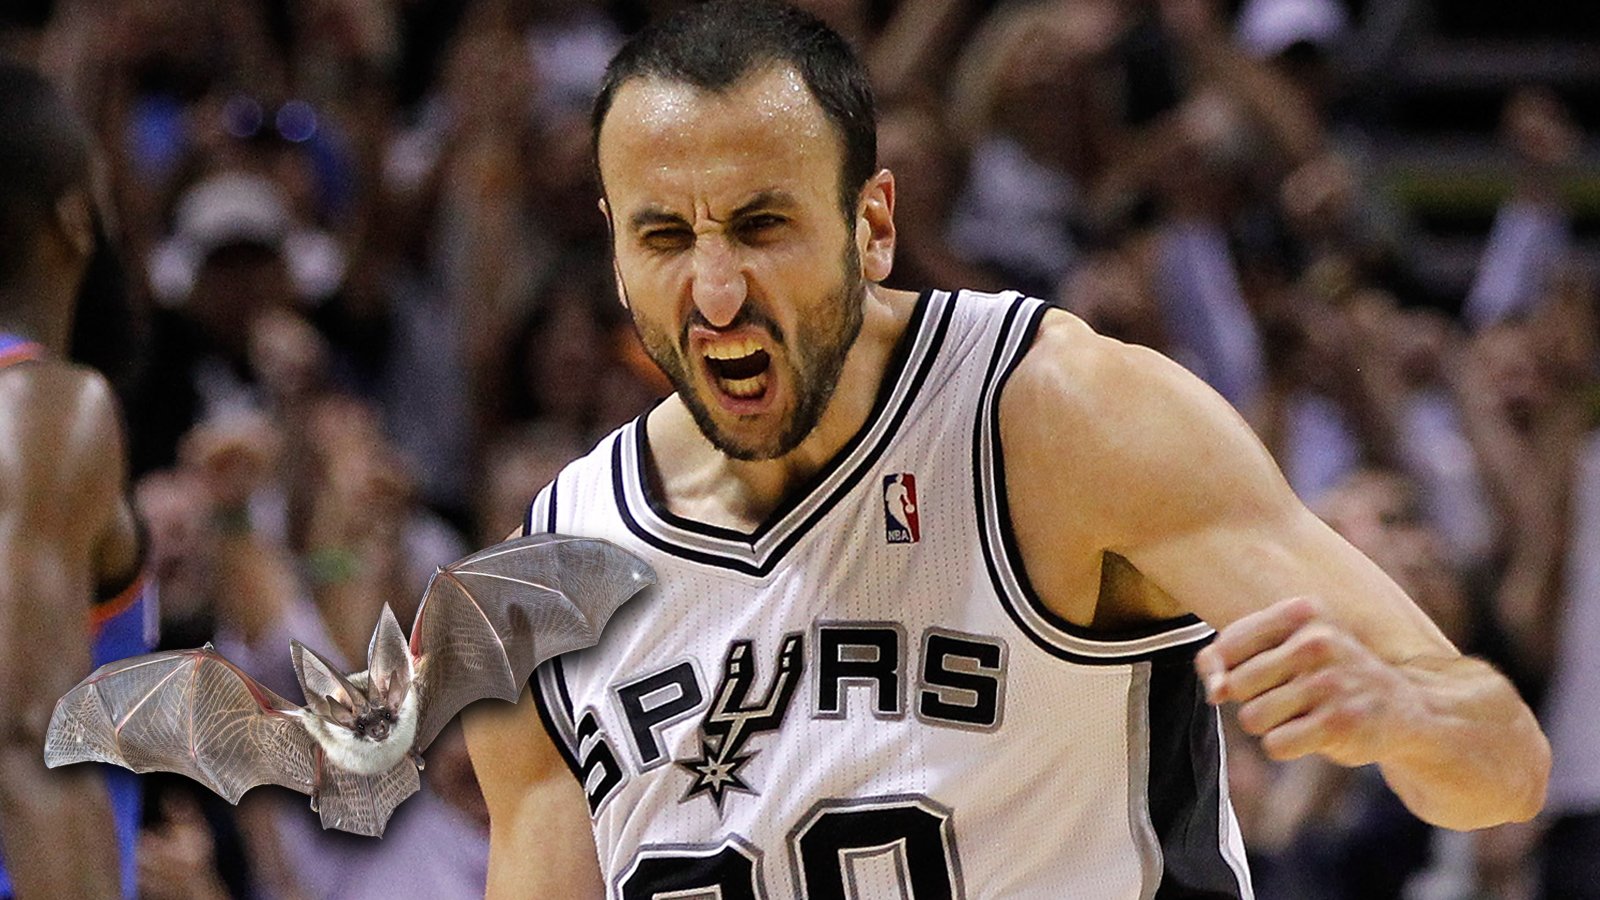 Manu Ginobili Swatting A Bat Out Of Midair During A Game On Halloween Was A Truly Bizarre NBA Moment